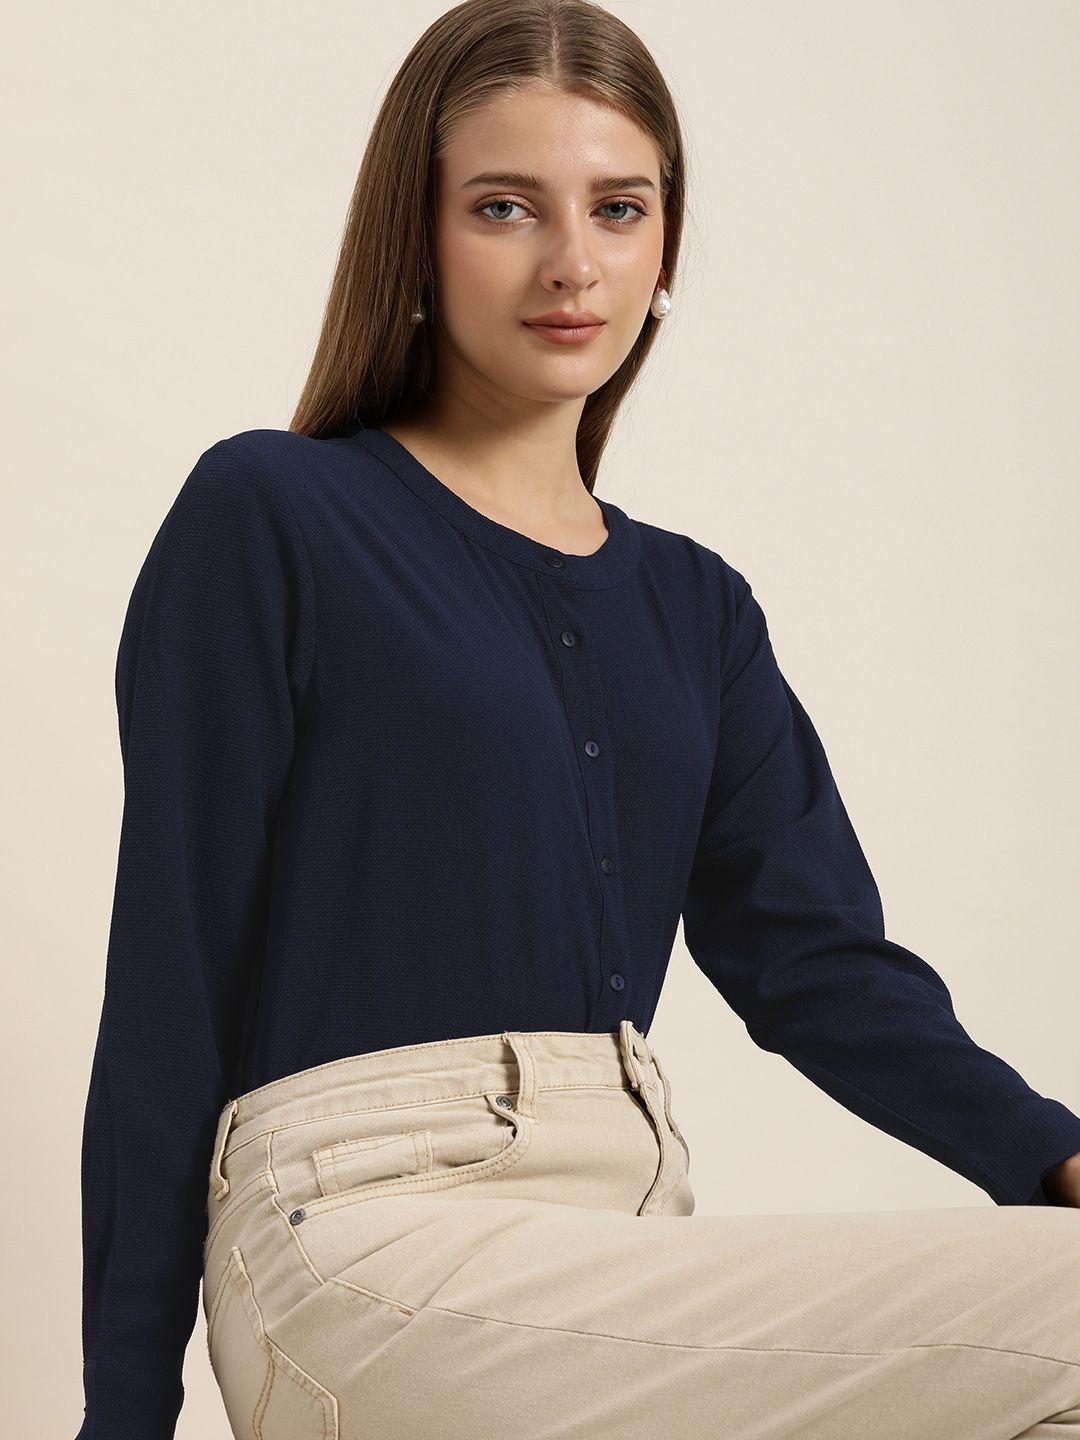 her by invictus navy blue shirt style top